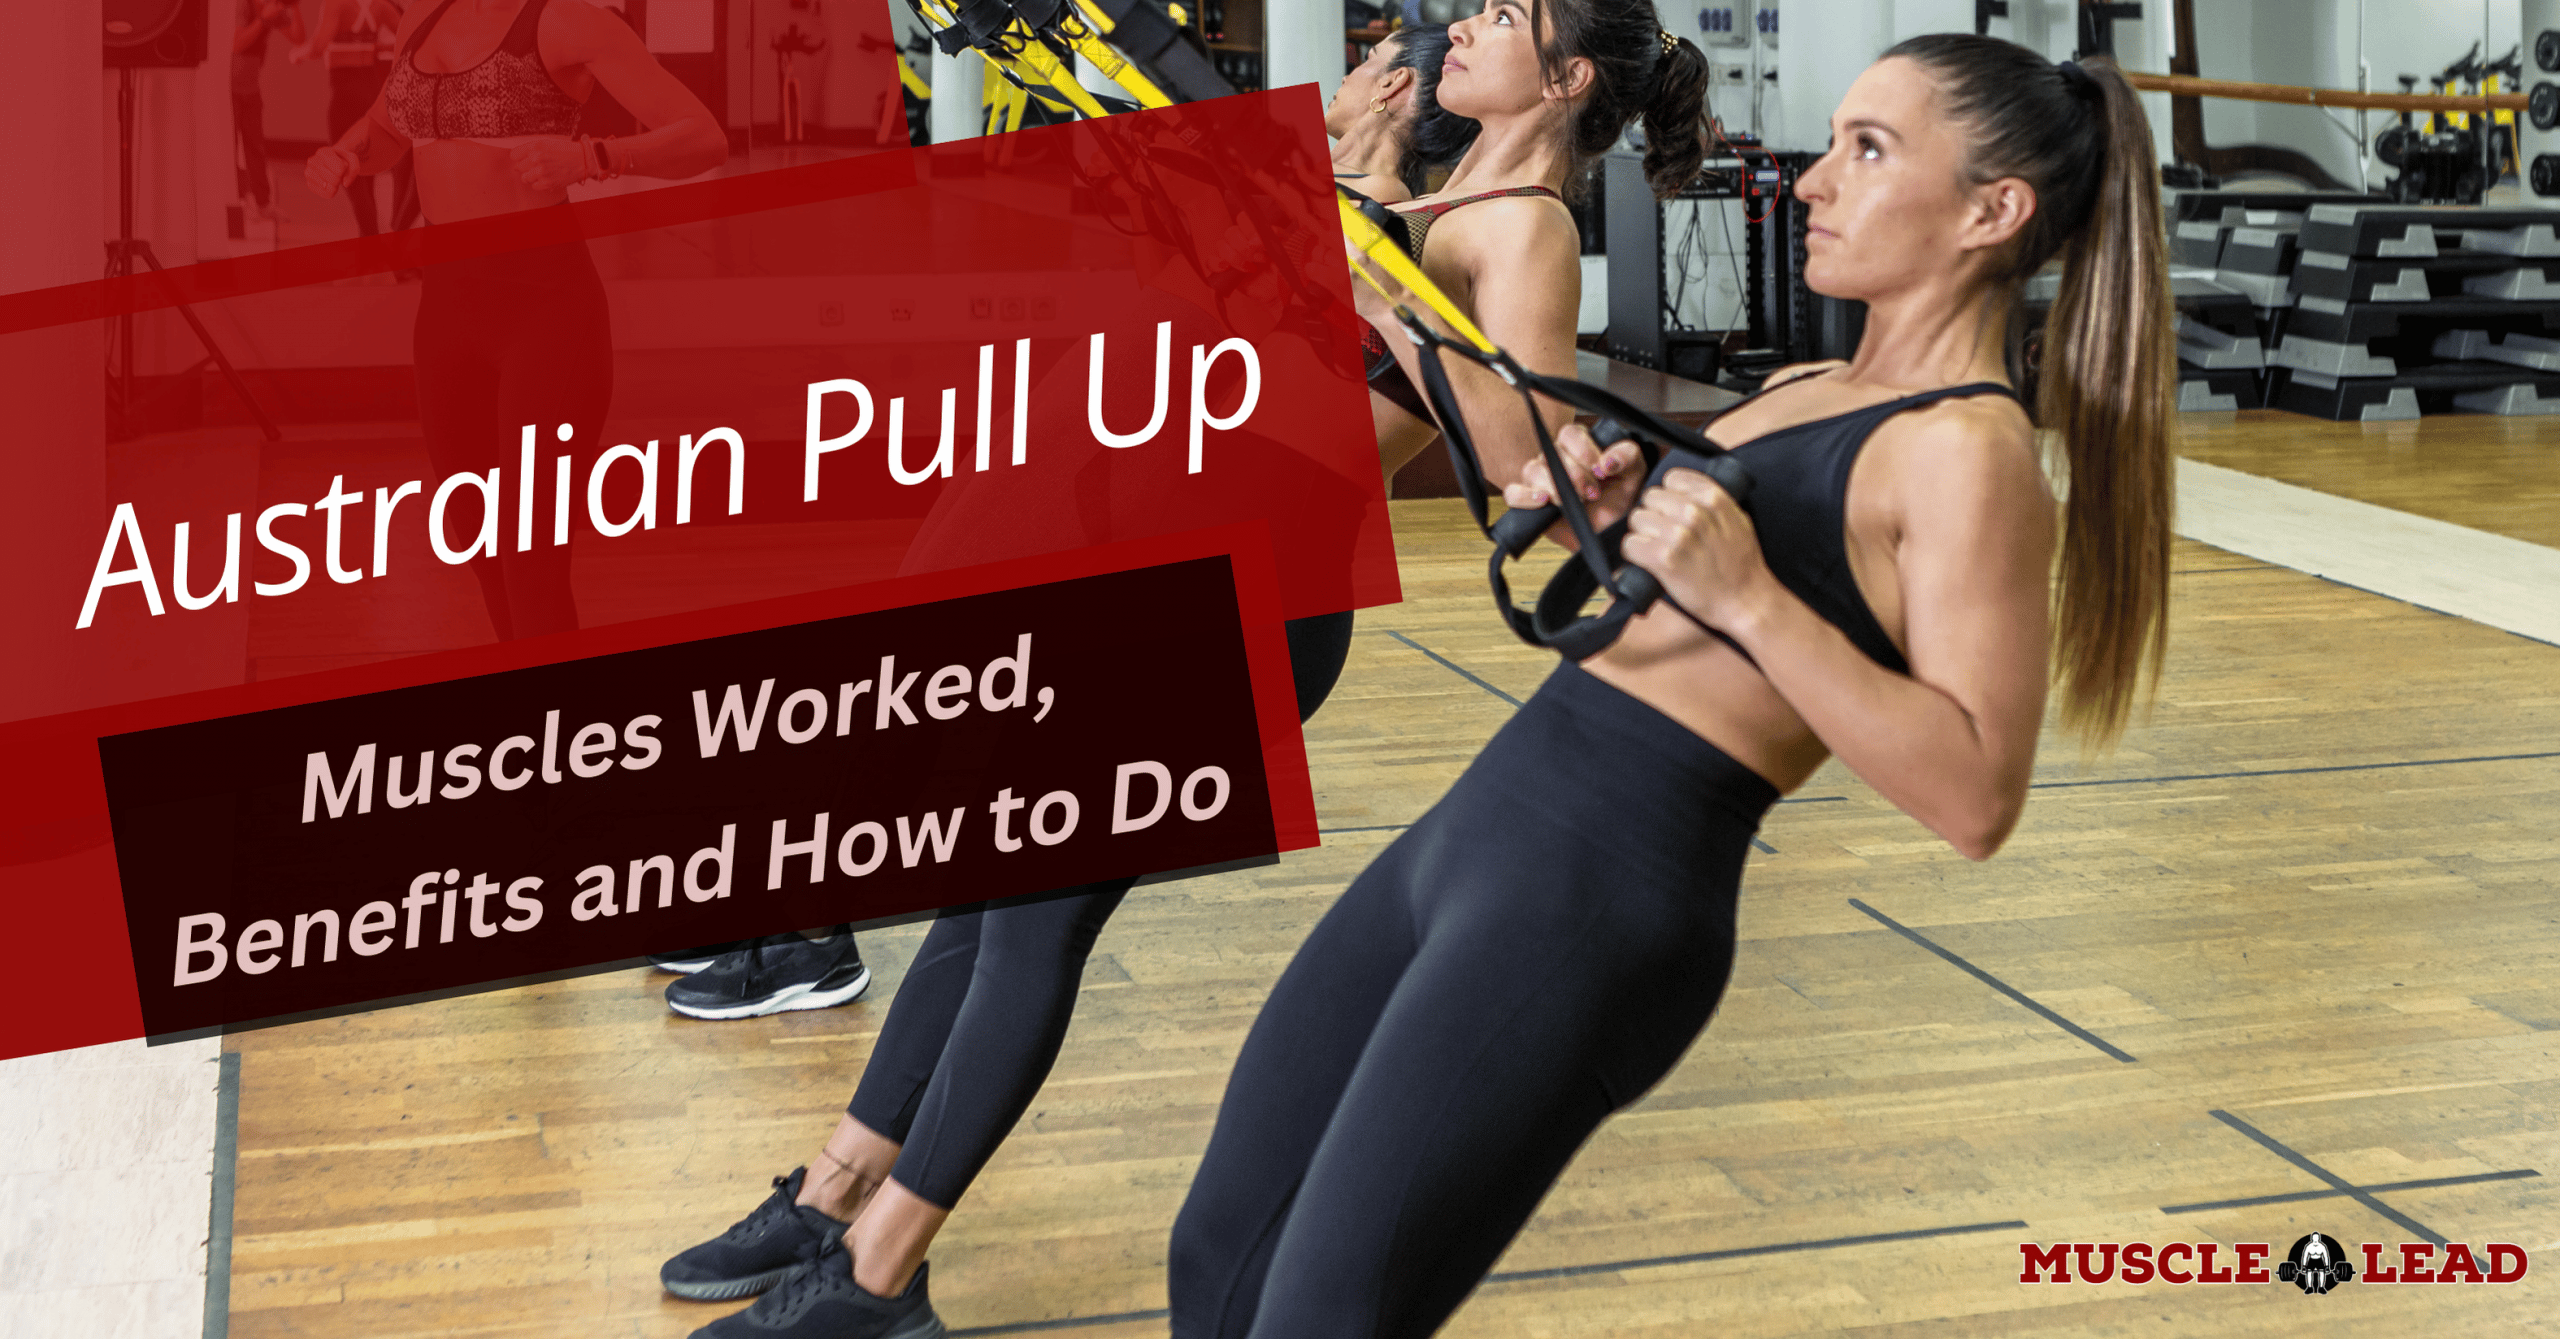 Australian Pull Up - Muscles Worked, Benefits and How to Do